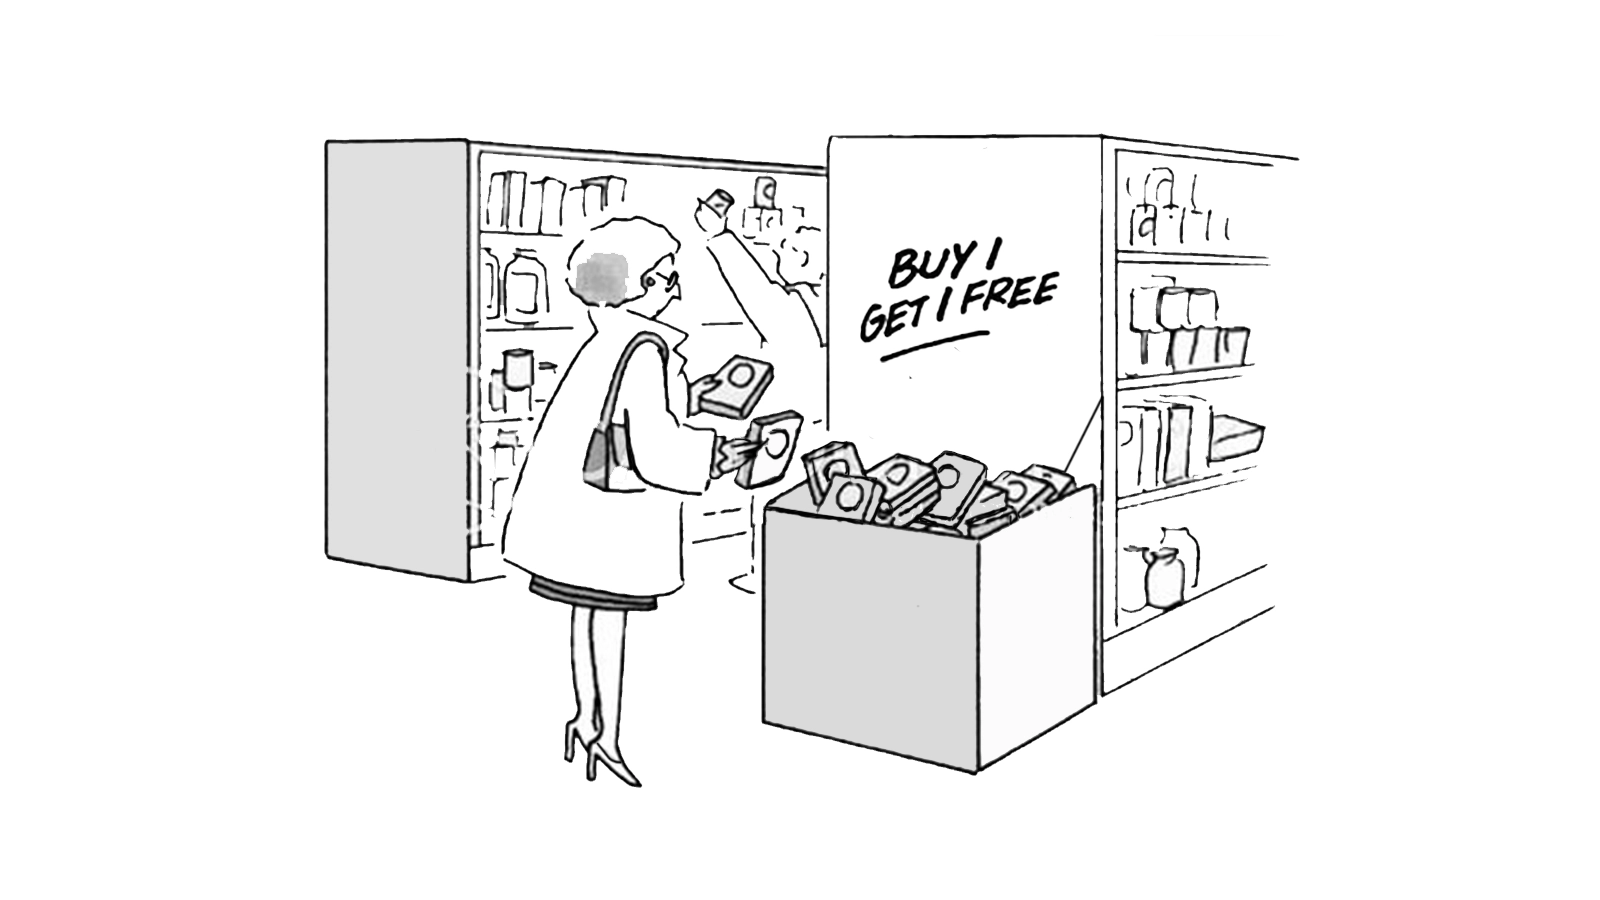 <b>&nbsp;A person buying a product sees a "buy 1 get 1" offer&nbsp;</b>